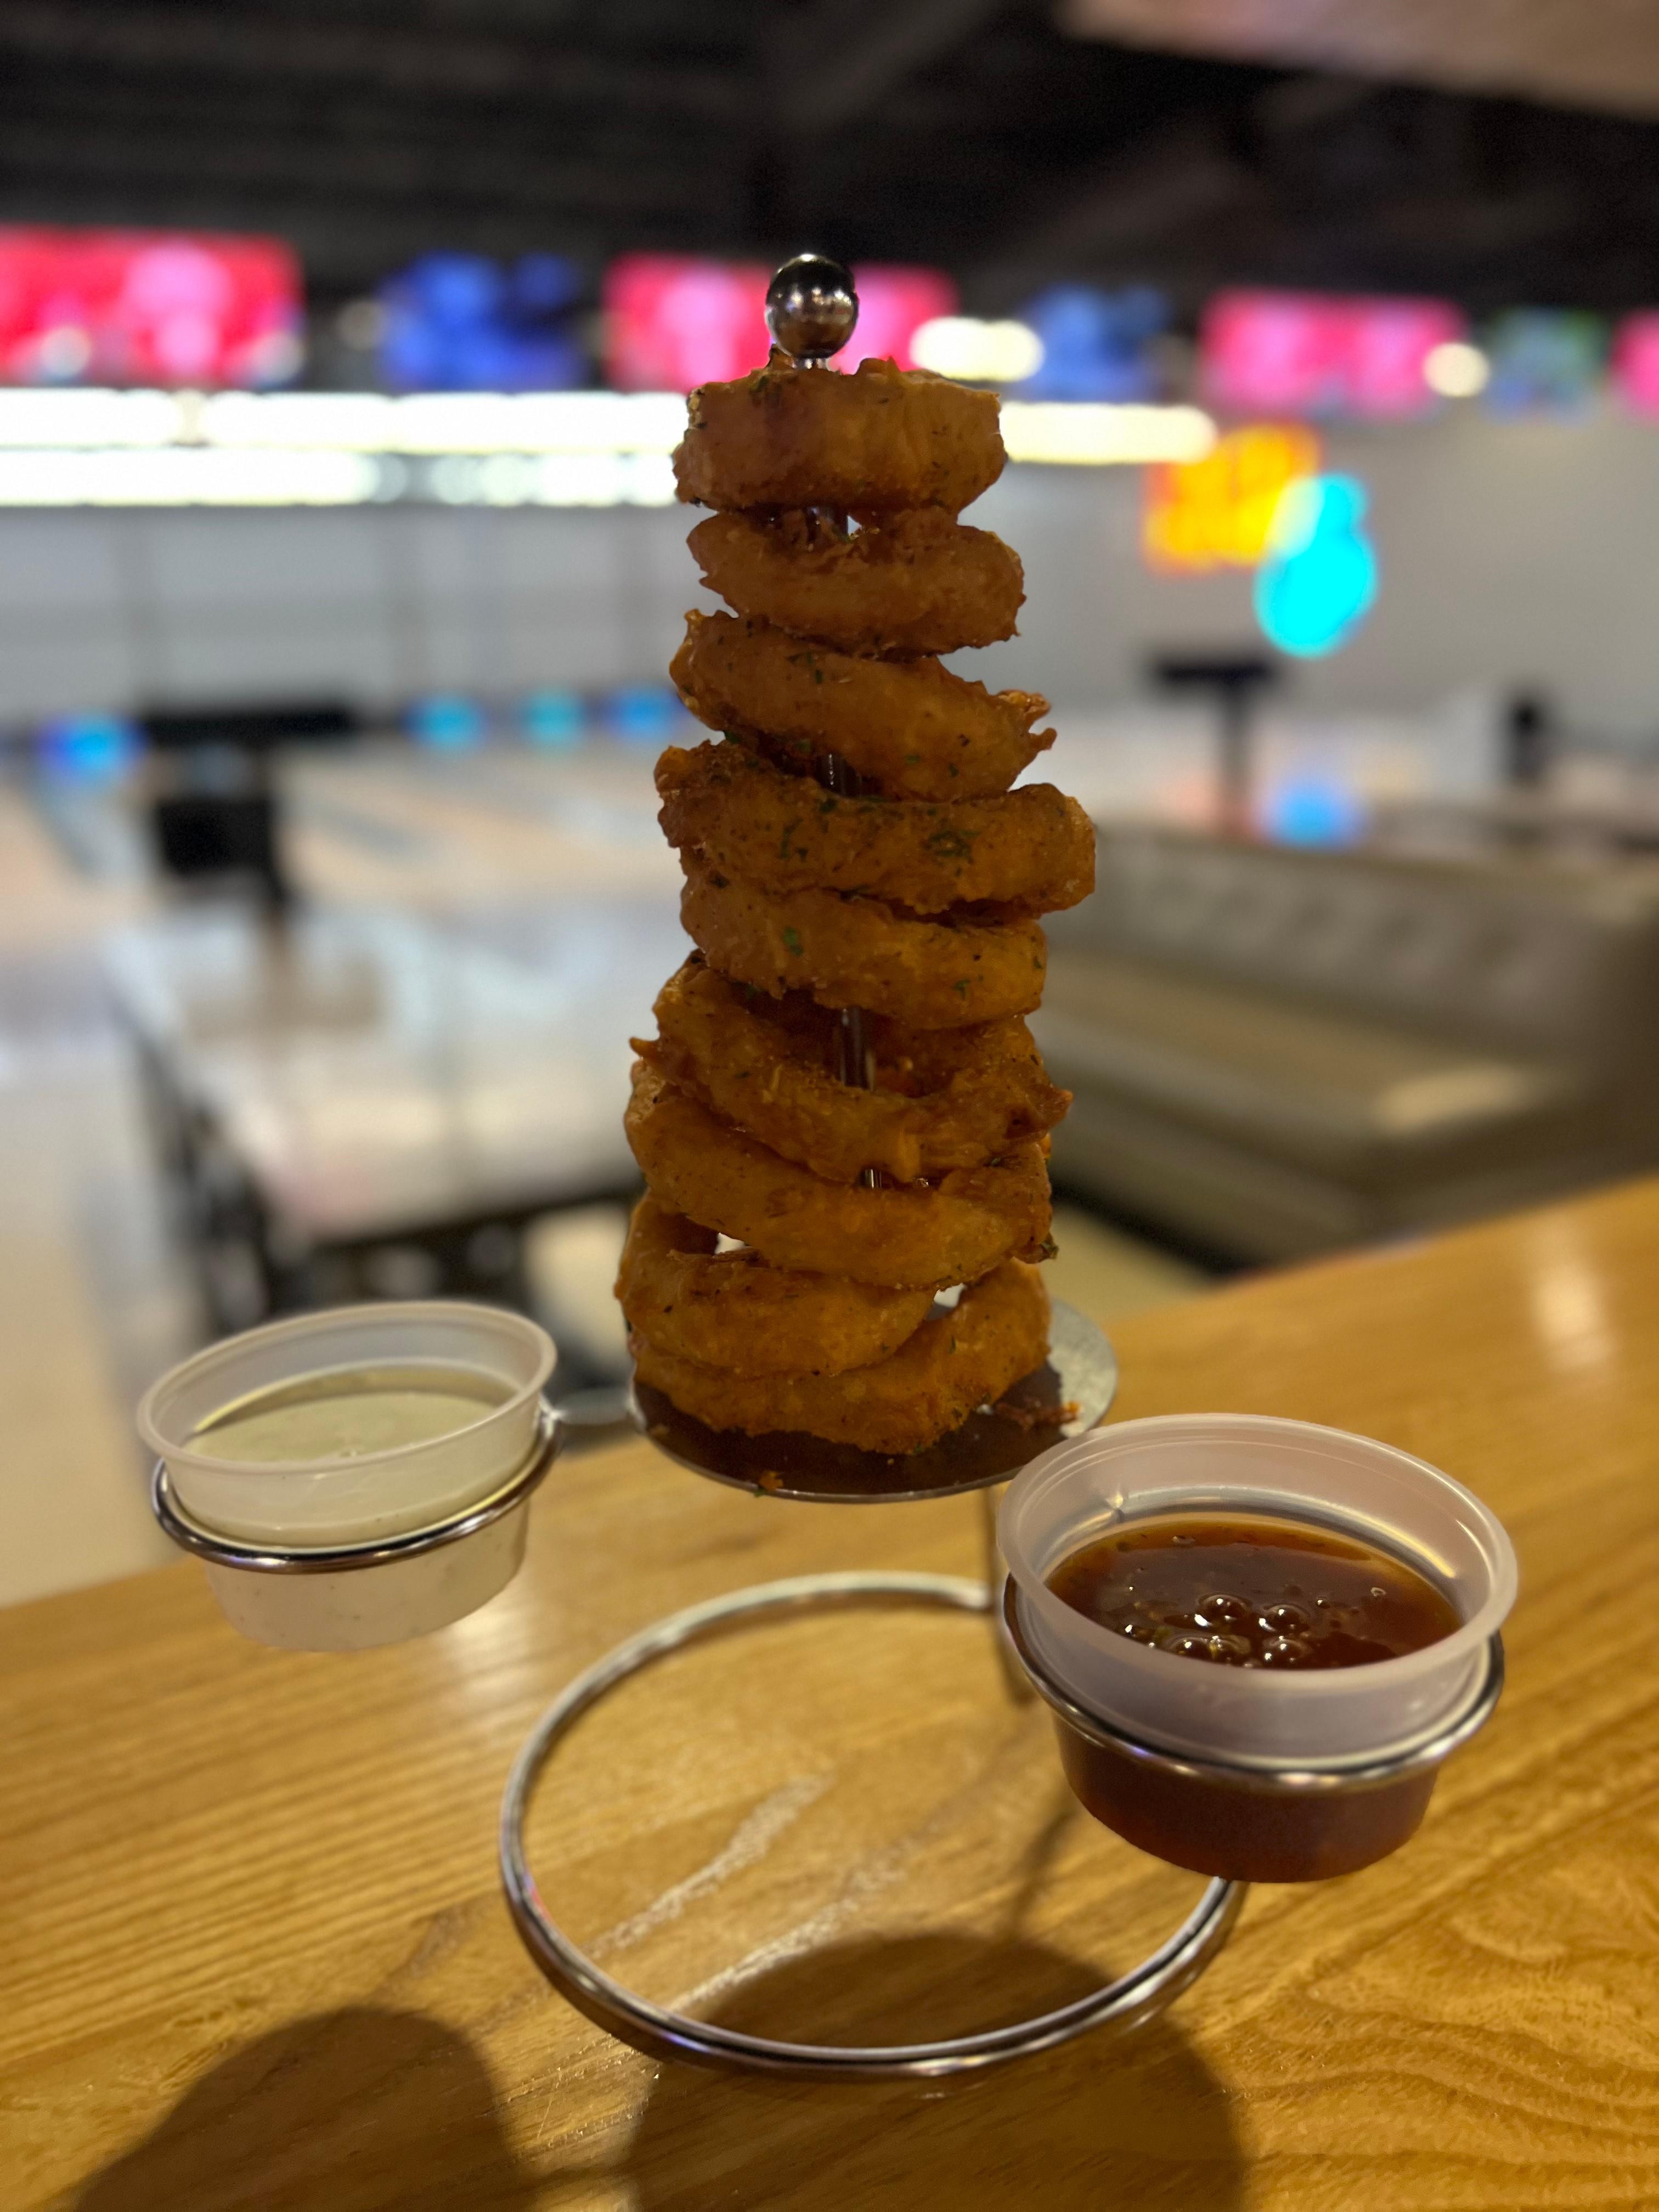 ONION RINGS TOWER